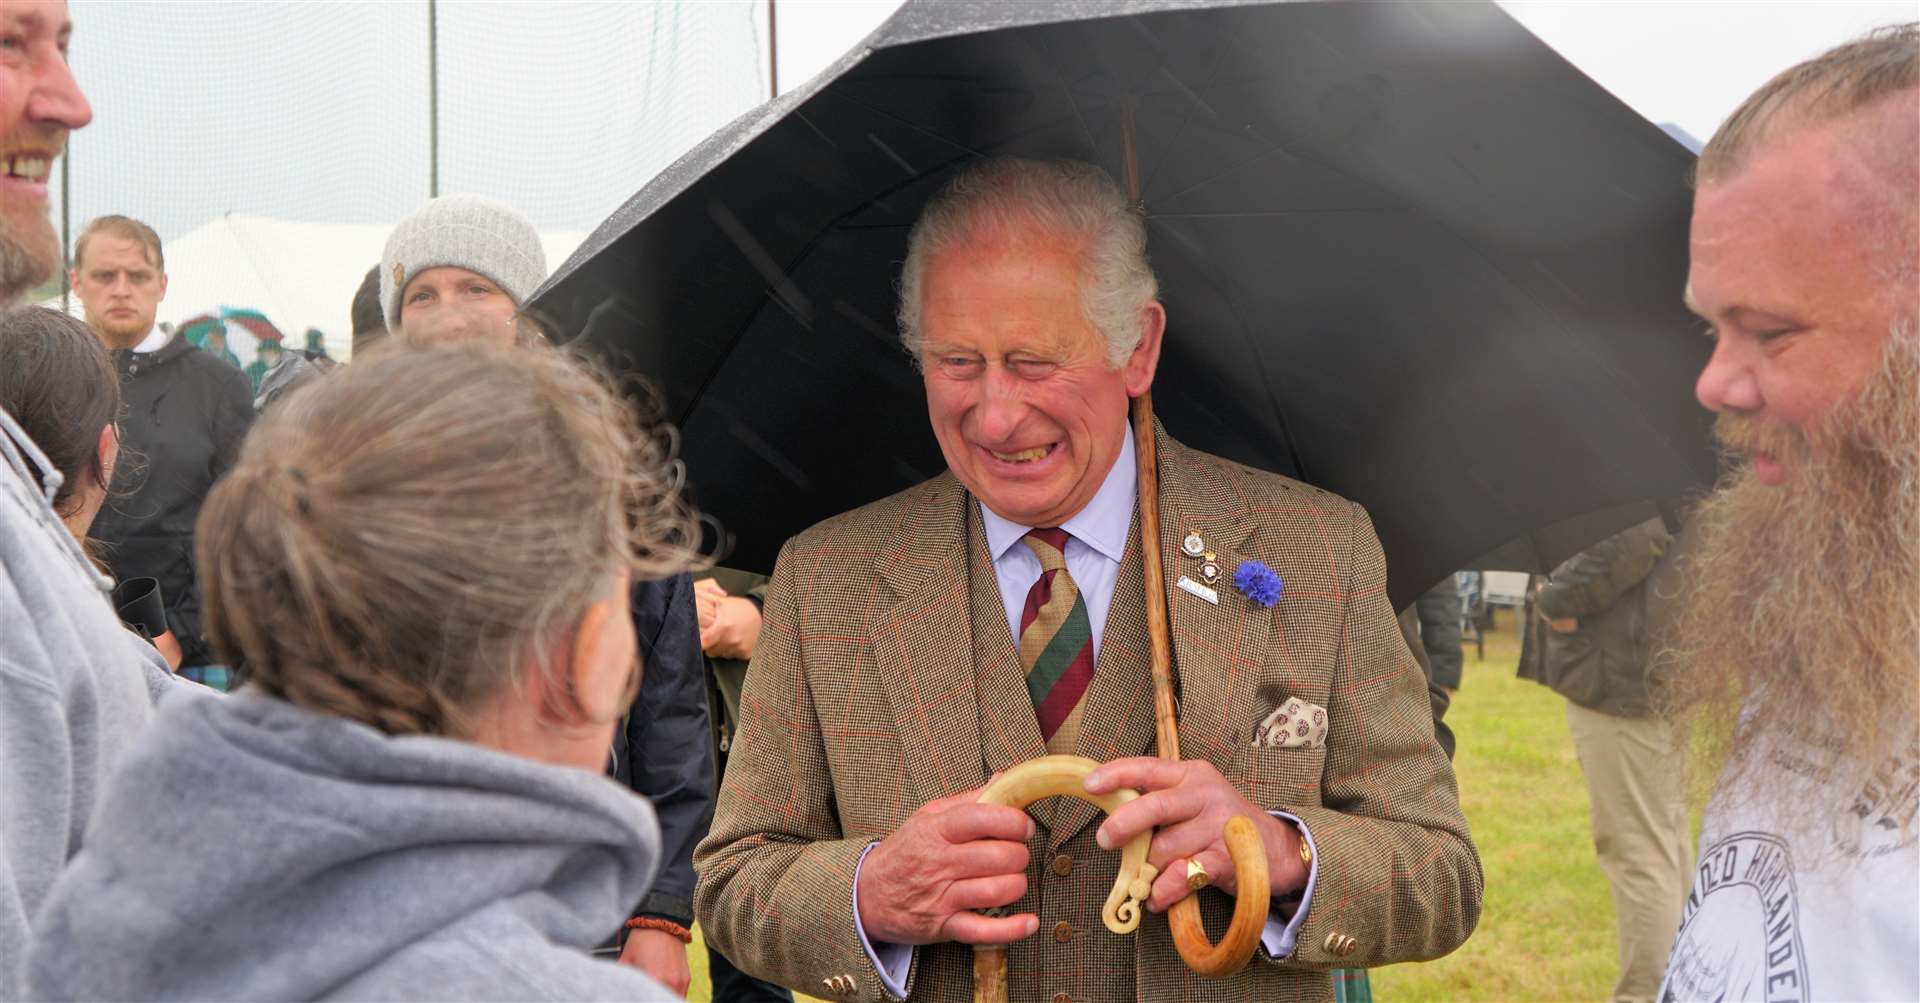 Prince Charles shared many a laugh with all those he met on the day. Picture: DGS